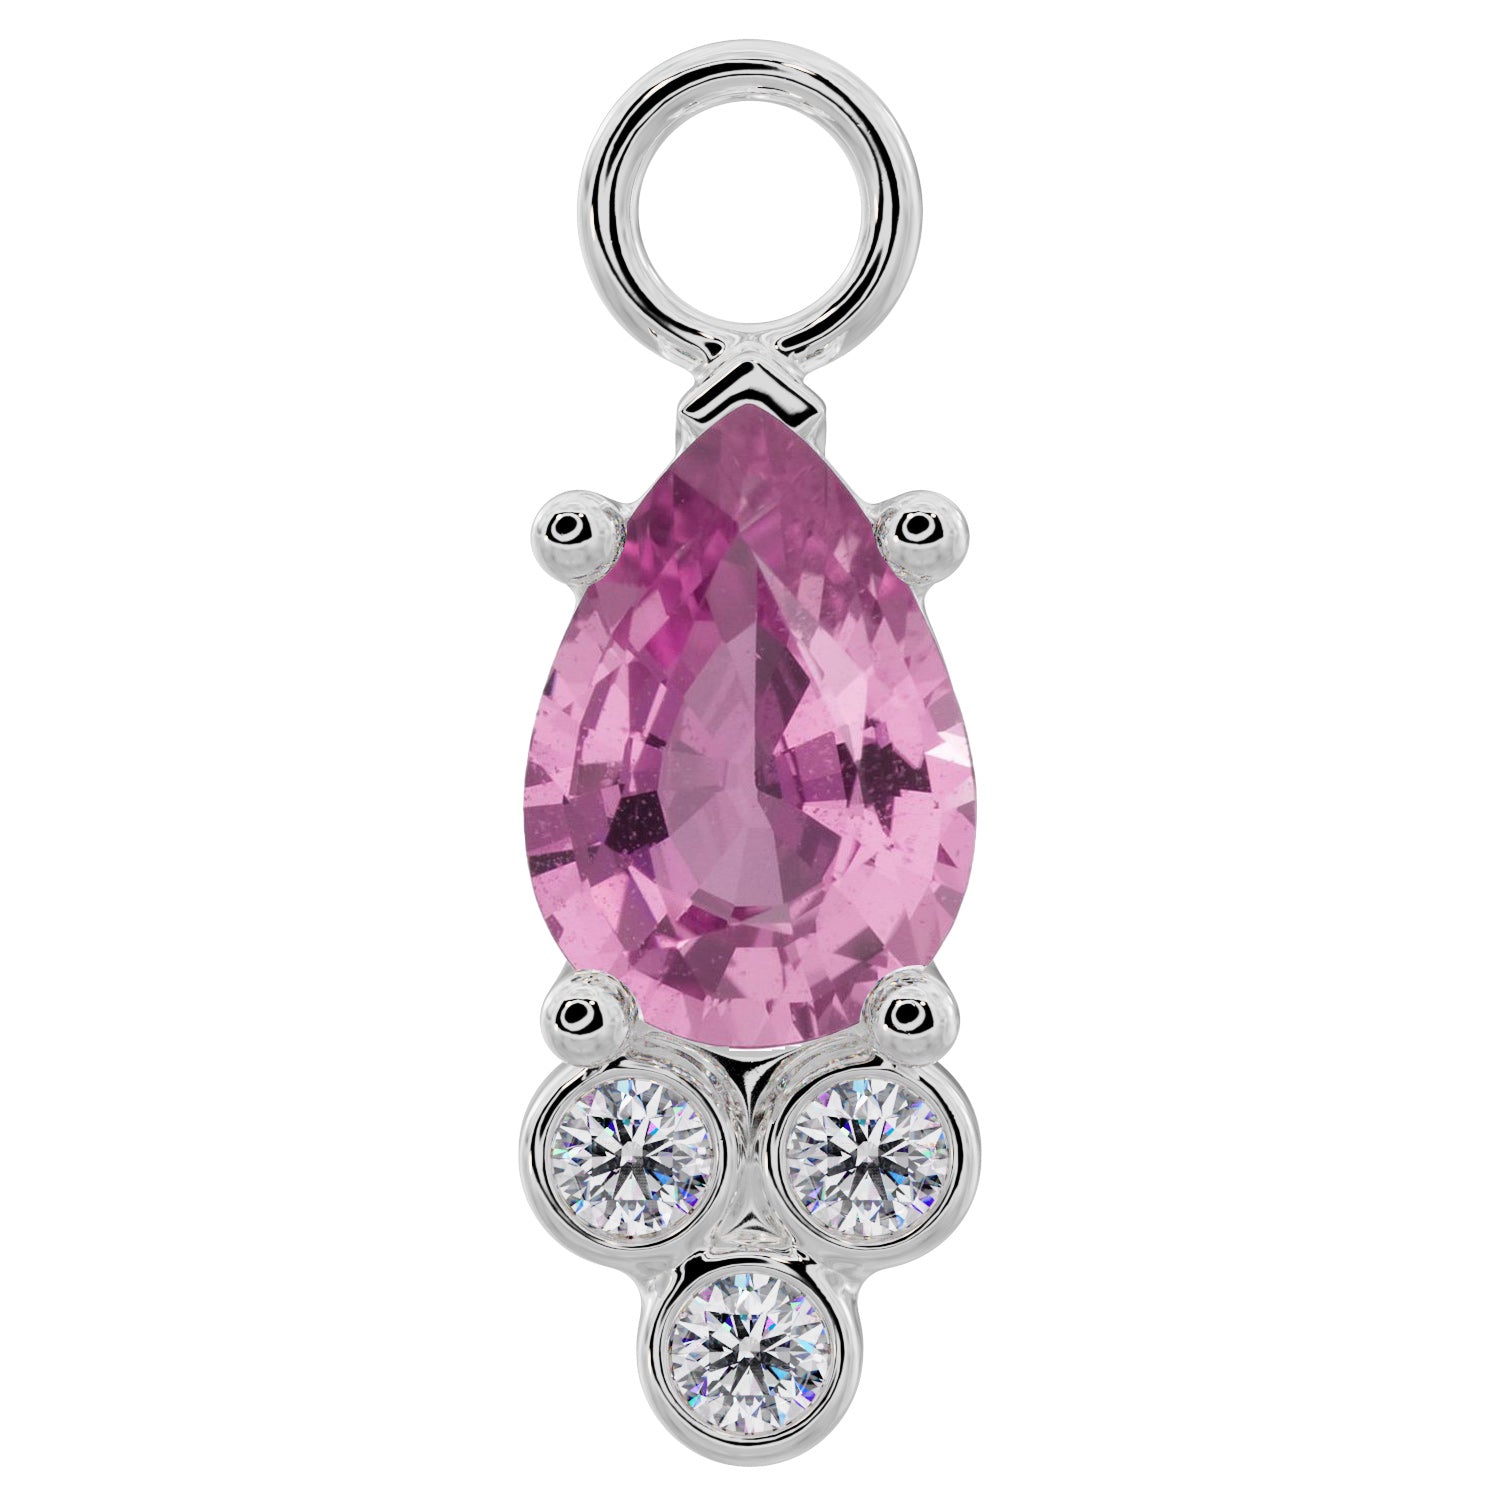 Pear with Tiny Diamonds Charm Accessory for Piercing Jewelry-Pink Sapphire   950 Platinum